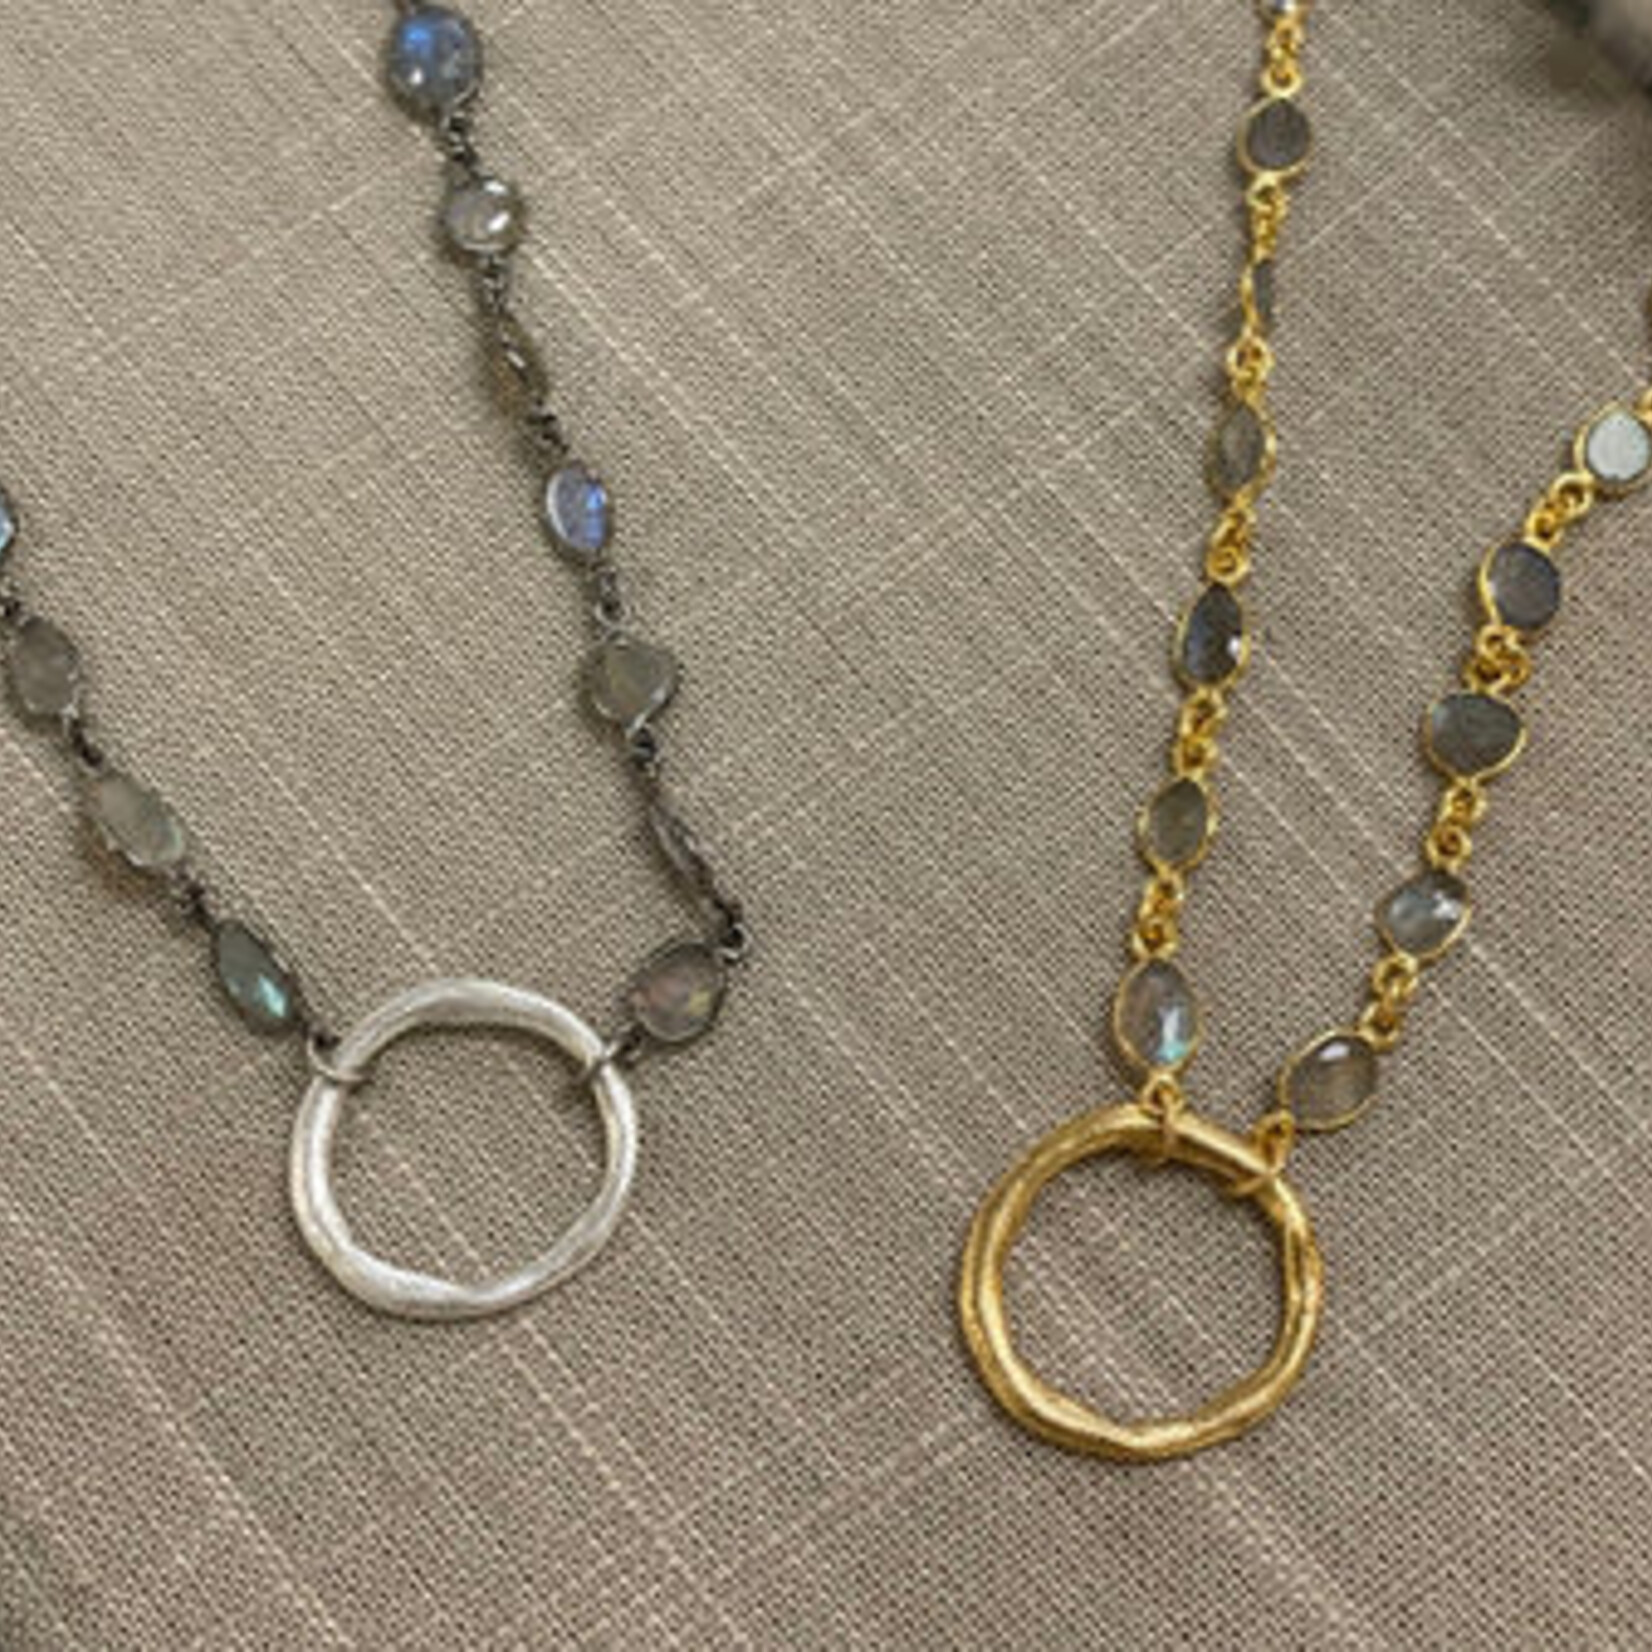 LJ Sonder Crosby- Labradorite Necklace with Hammered Circle Connector - Gold